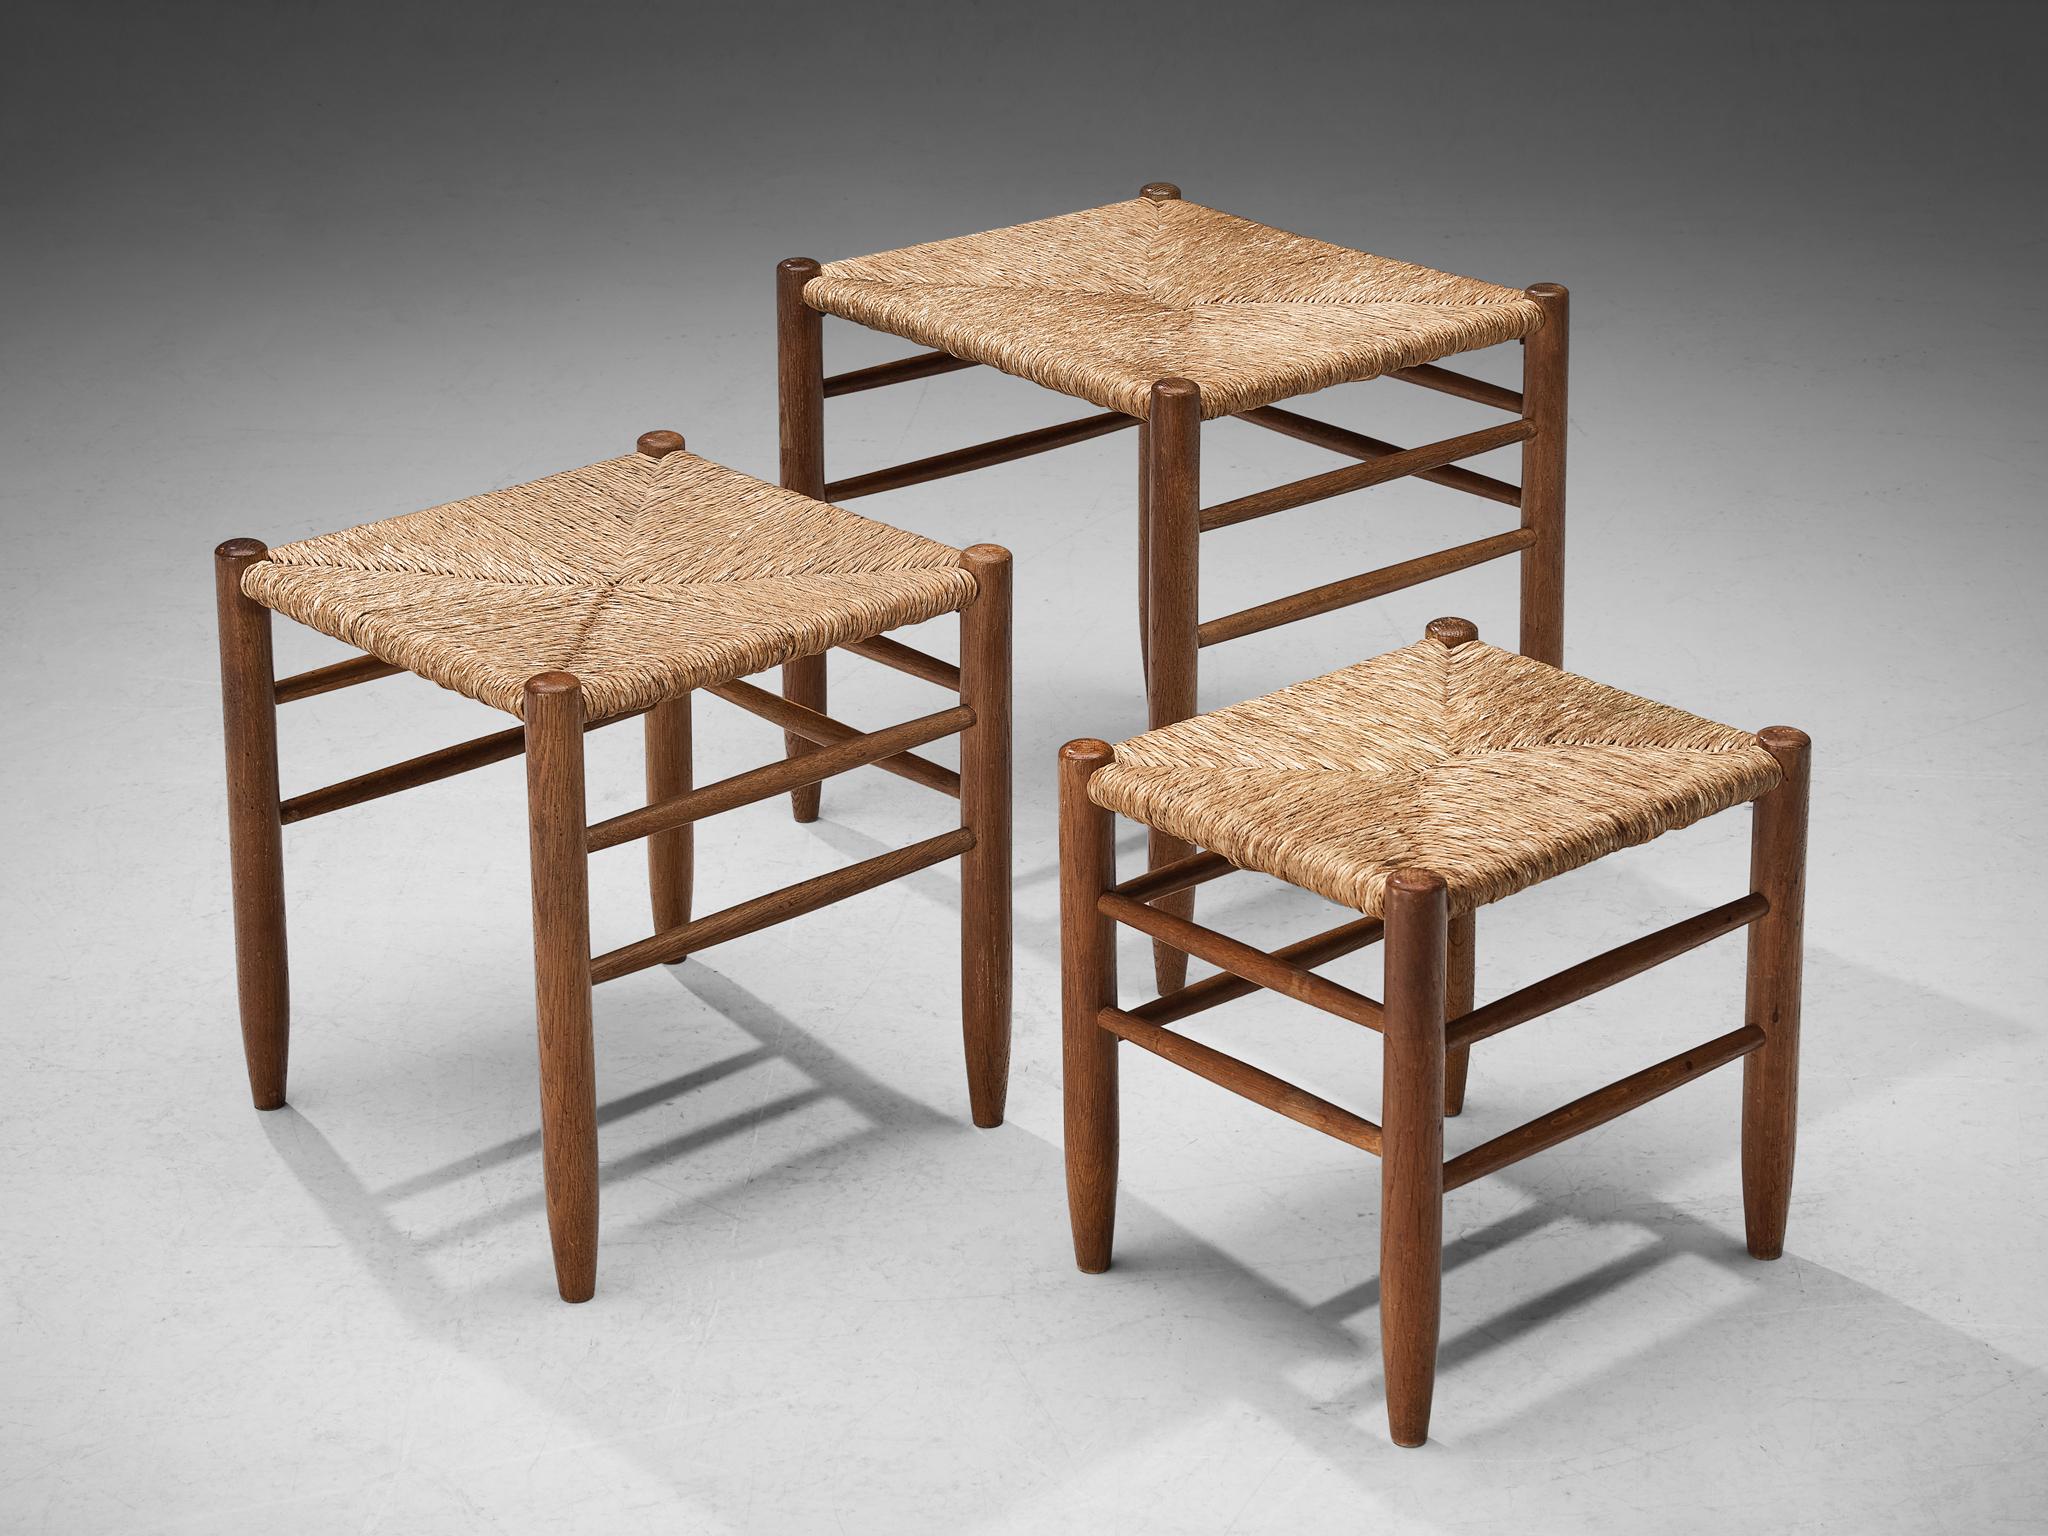 Sidetables, oak and straw, France, 1950s. 

A lovely set of three side or nesting tables. The combination of the oak and straw create a warm and comfortable look.

Measuments of biggest table are shown.

